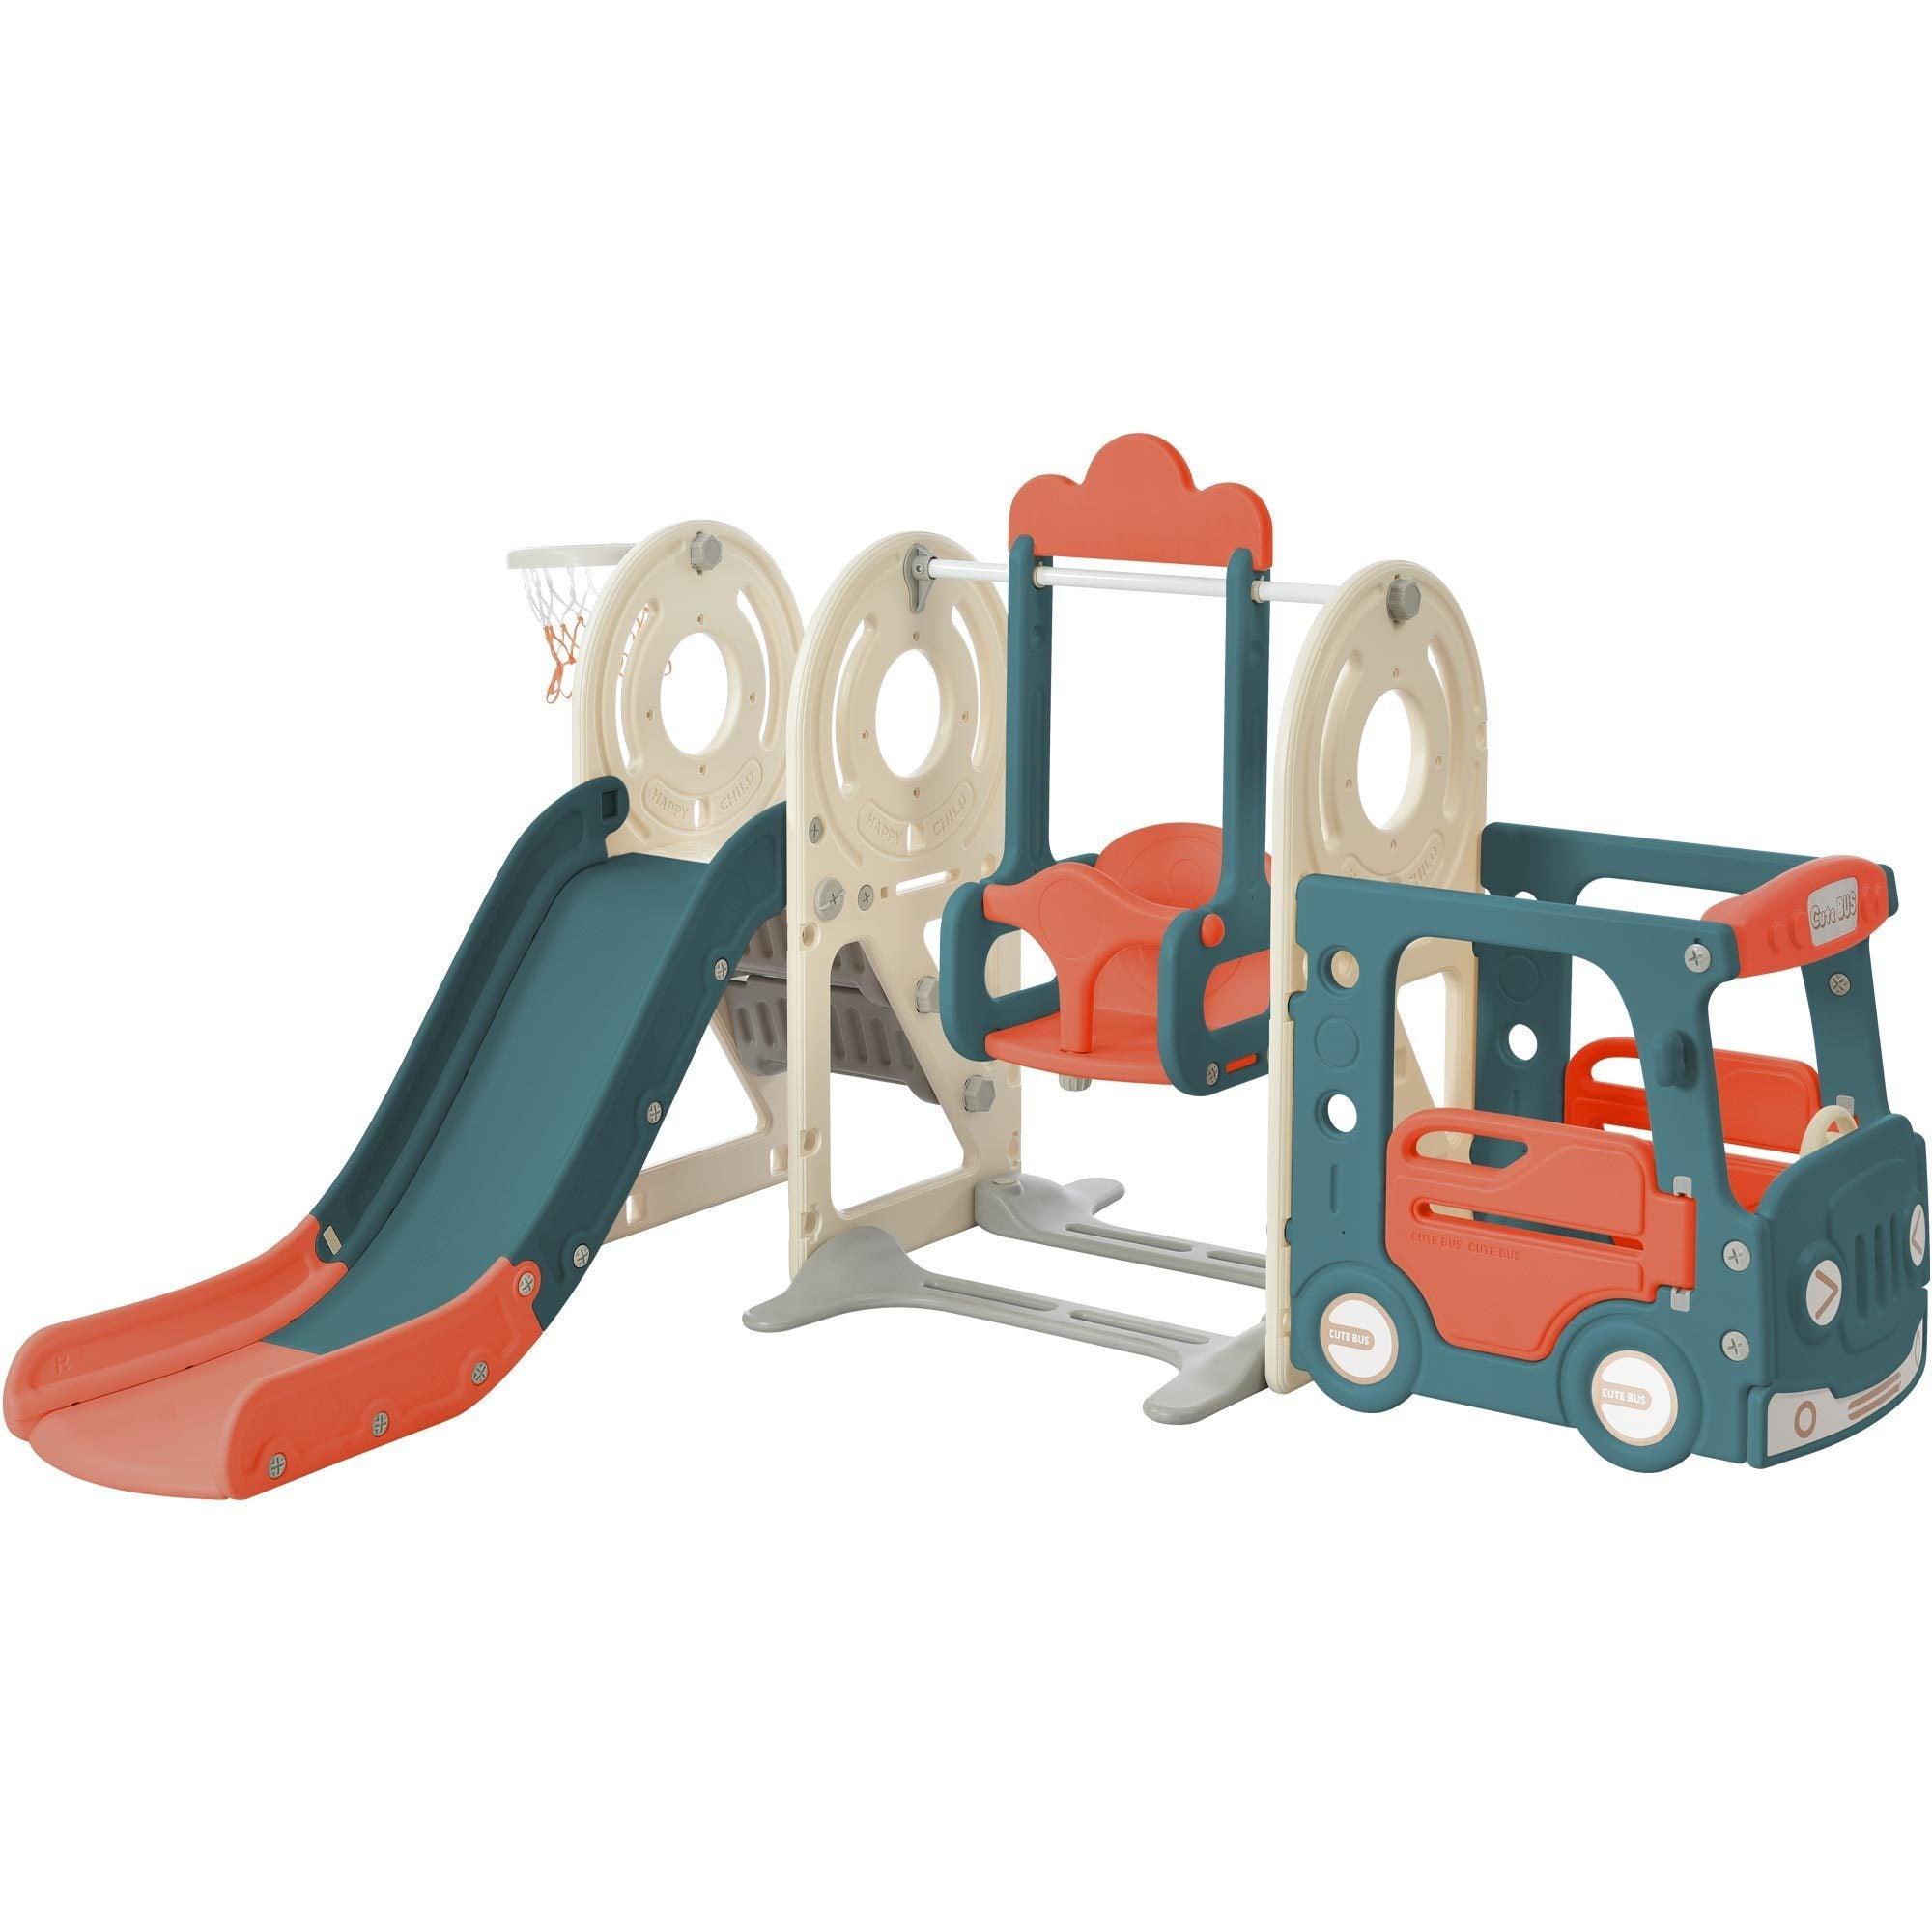 🆓🚛 Kids Swing-N-Slide With Bus Play Structure, Freestanding Bus Toy With Slide&Swing for Toddlers, Bus Slide Set With Basketball Hoop, Red & Blue